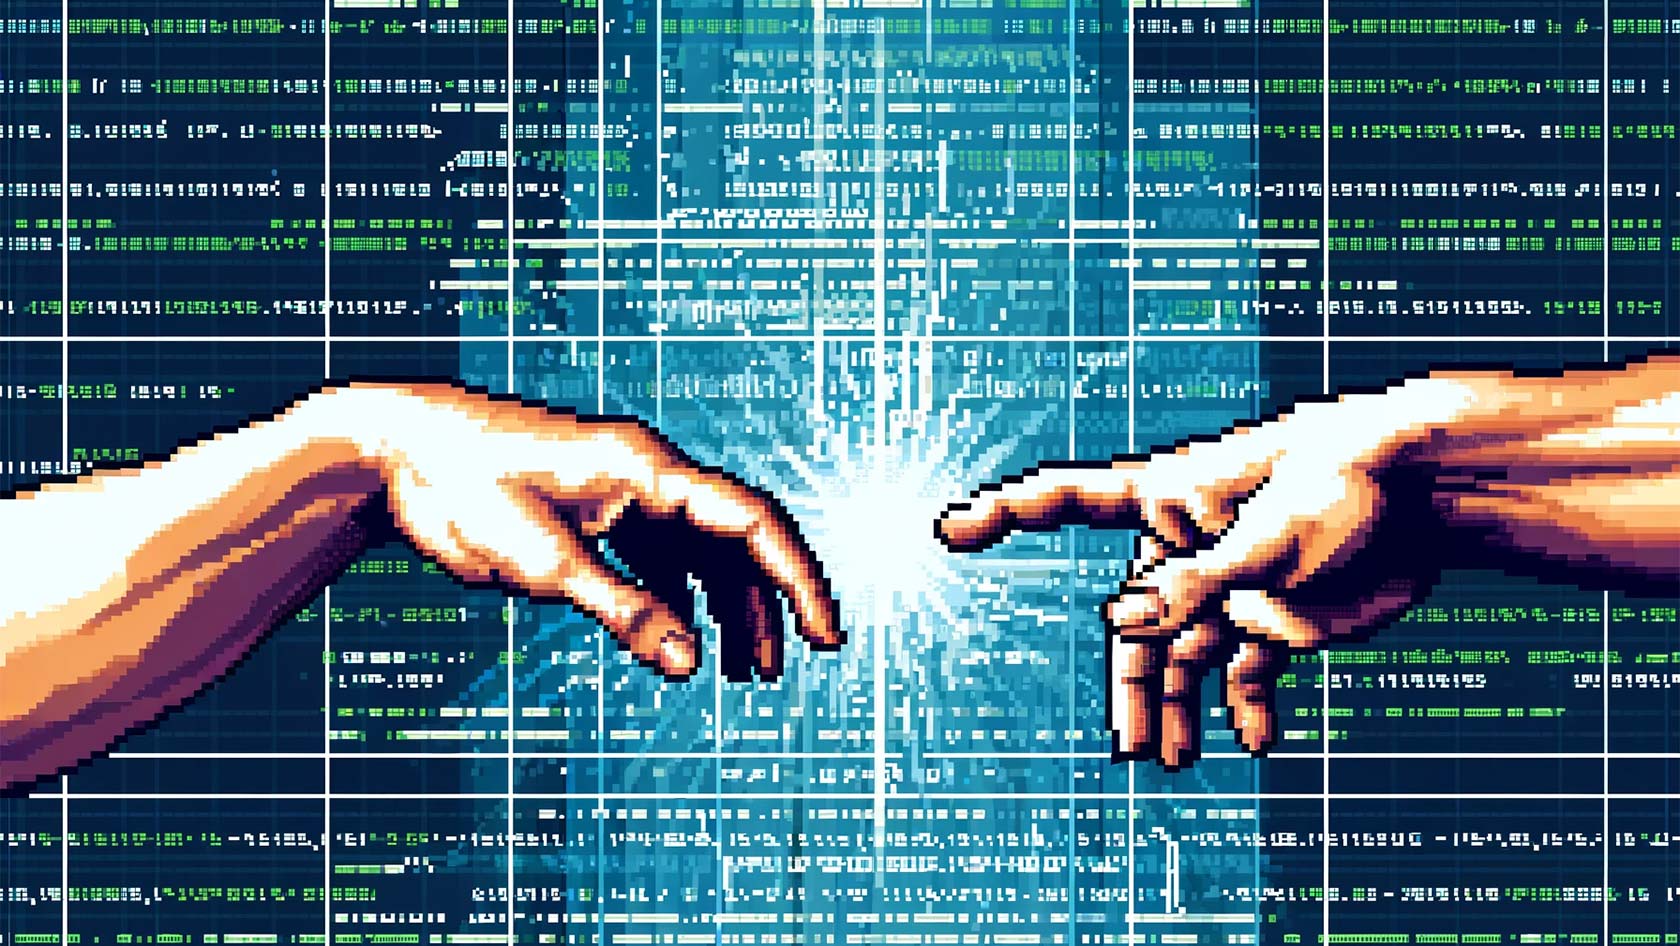 langelo hands in front of computer code (image generated with AI)